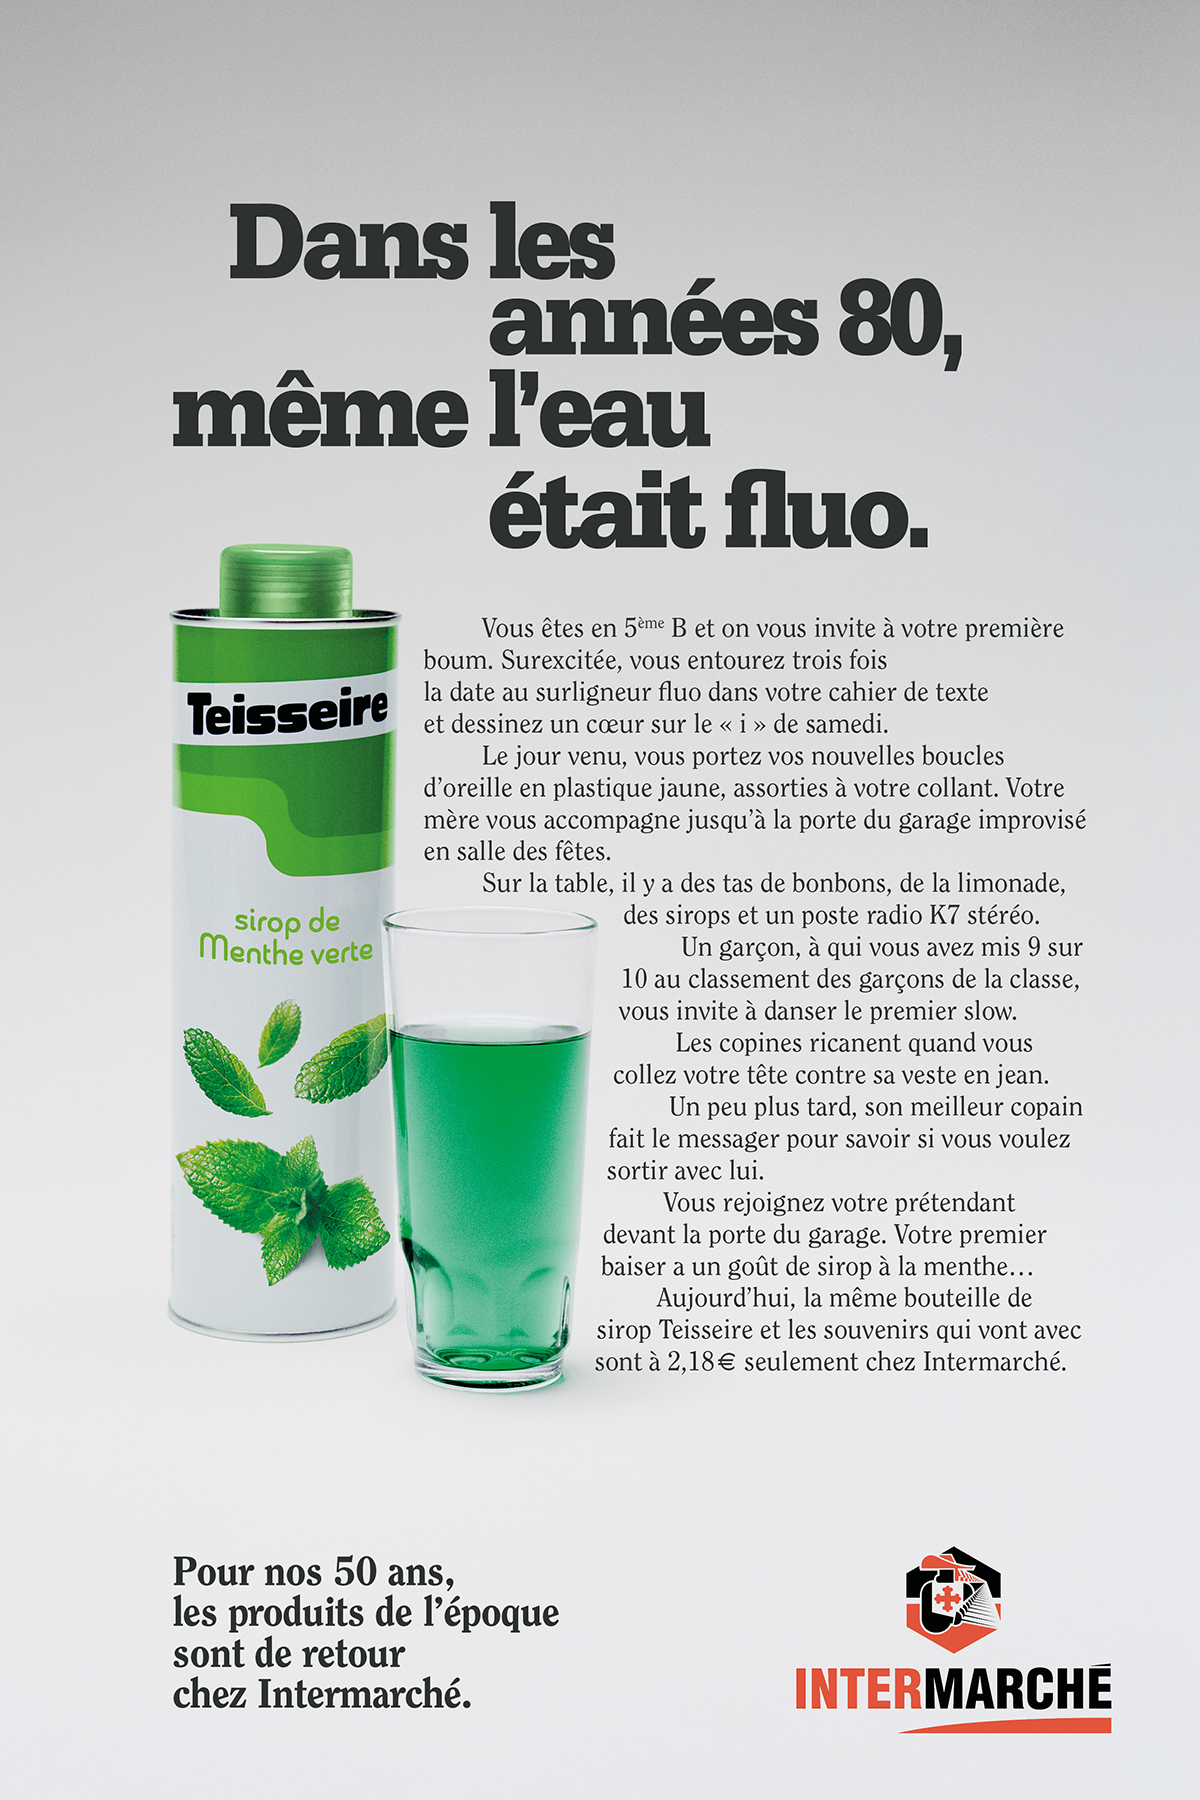 intermarche-50-ans-tf1-evelyne-leclercq-agence-romance-teisseire-packaging-1960-1970